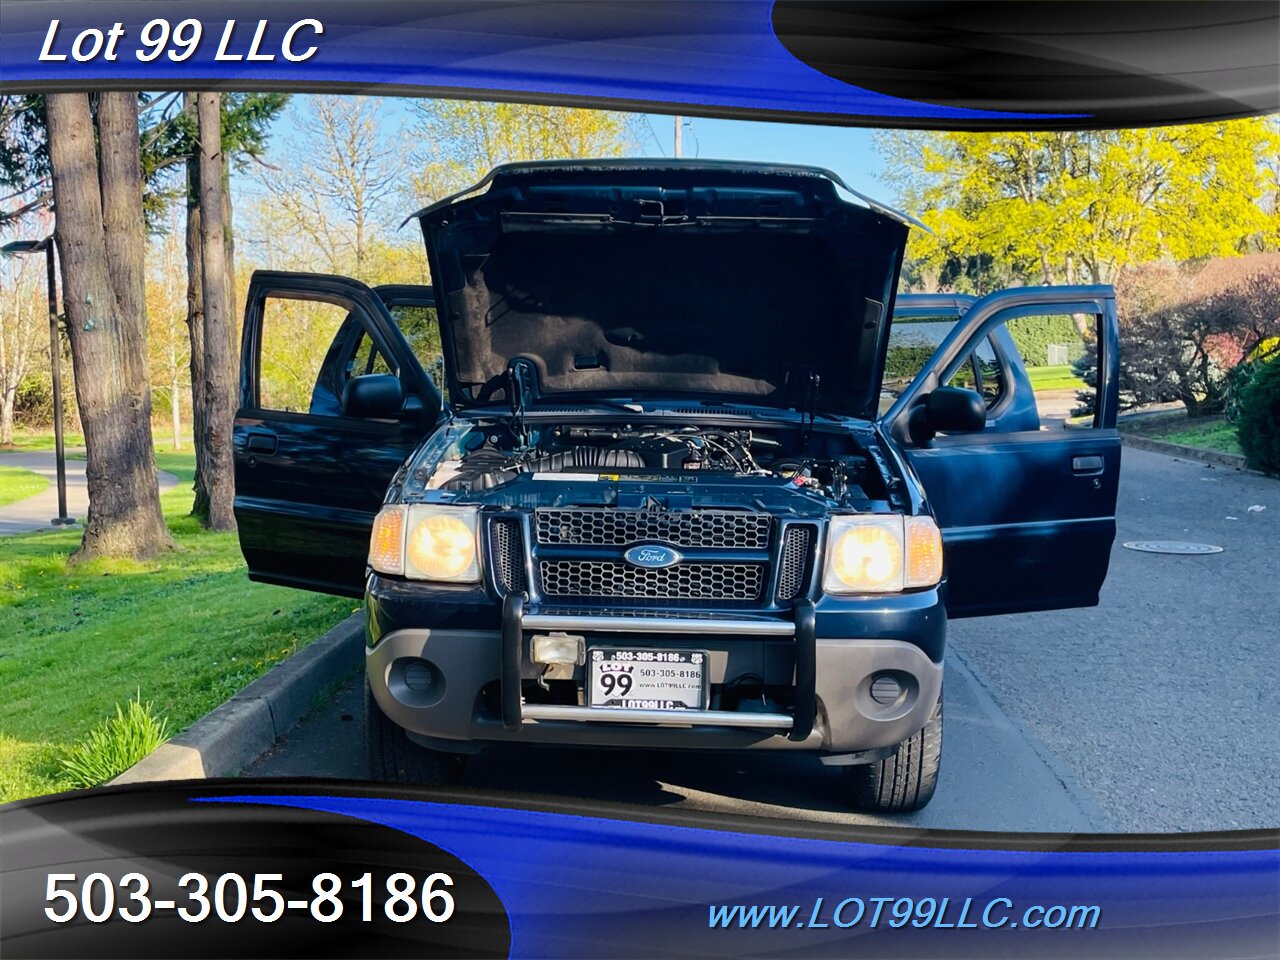 2003 Ford Explorer Sport Trac XLS 4x4  1-OWNER 117k  NEW TIRES  Canopy   - Photo 40 - Milwaukie, OR 97267